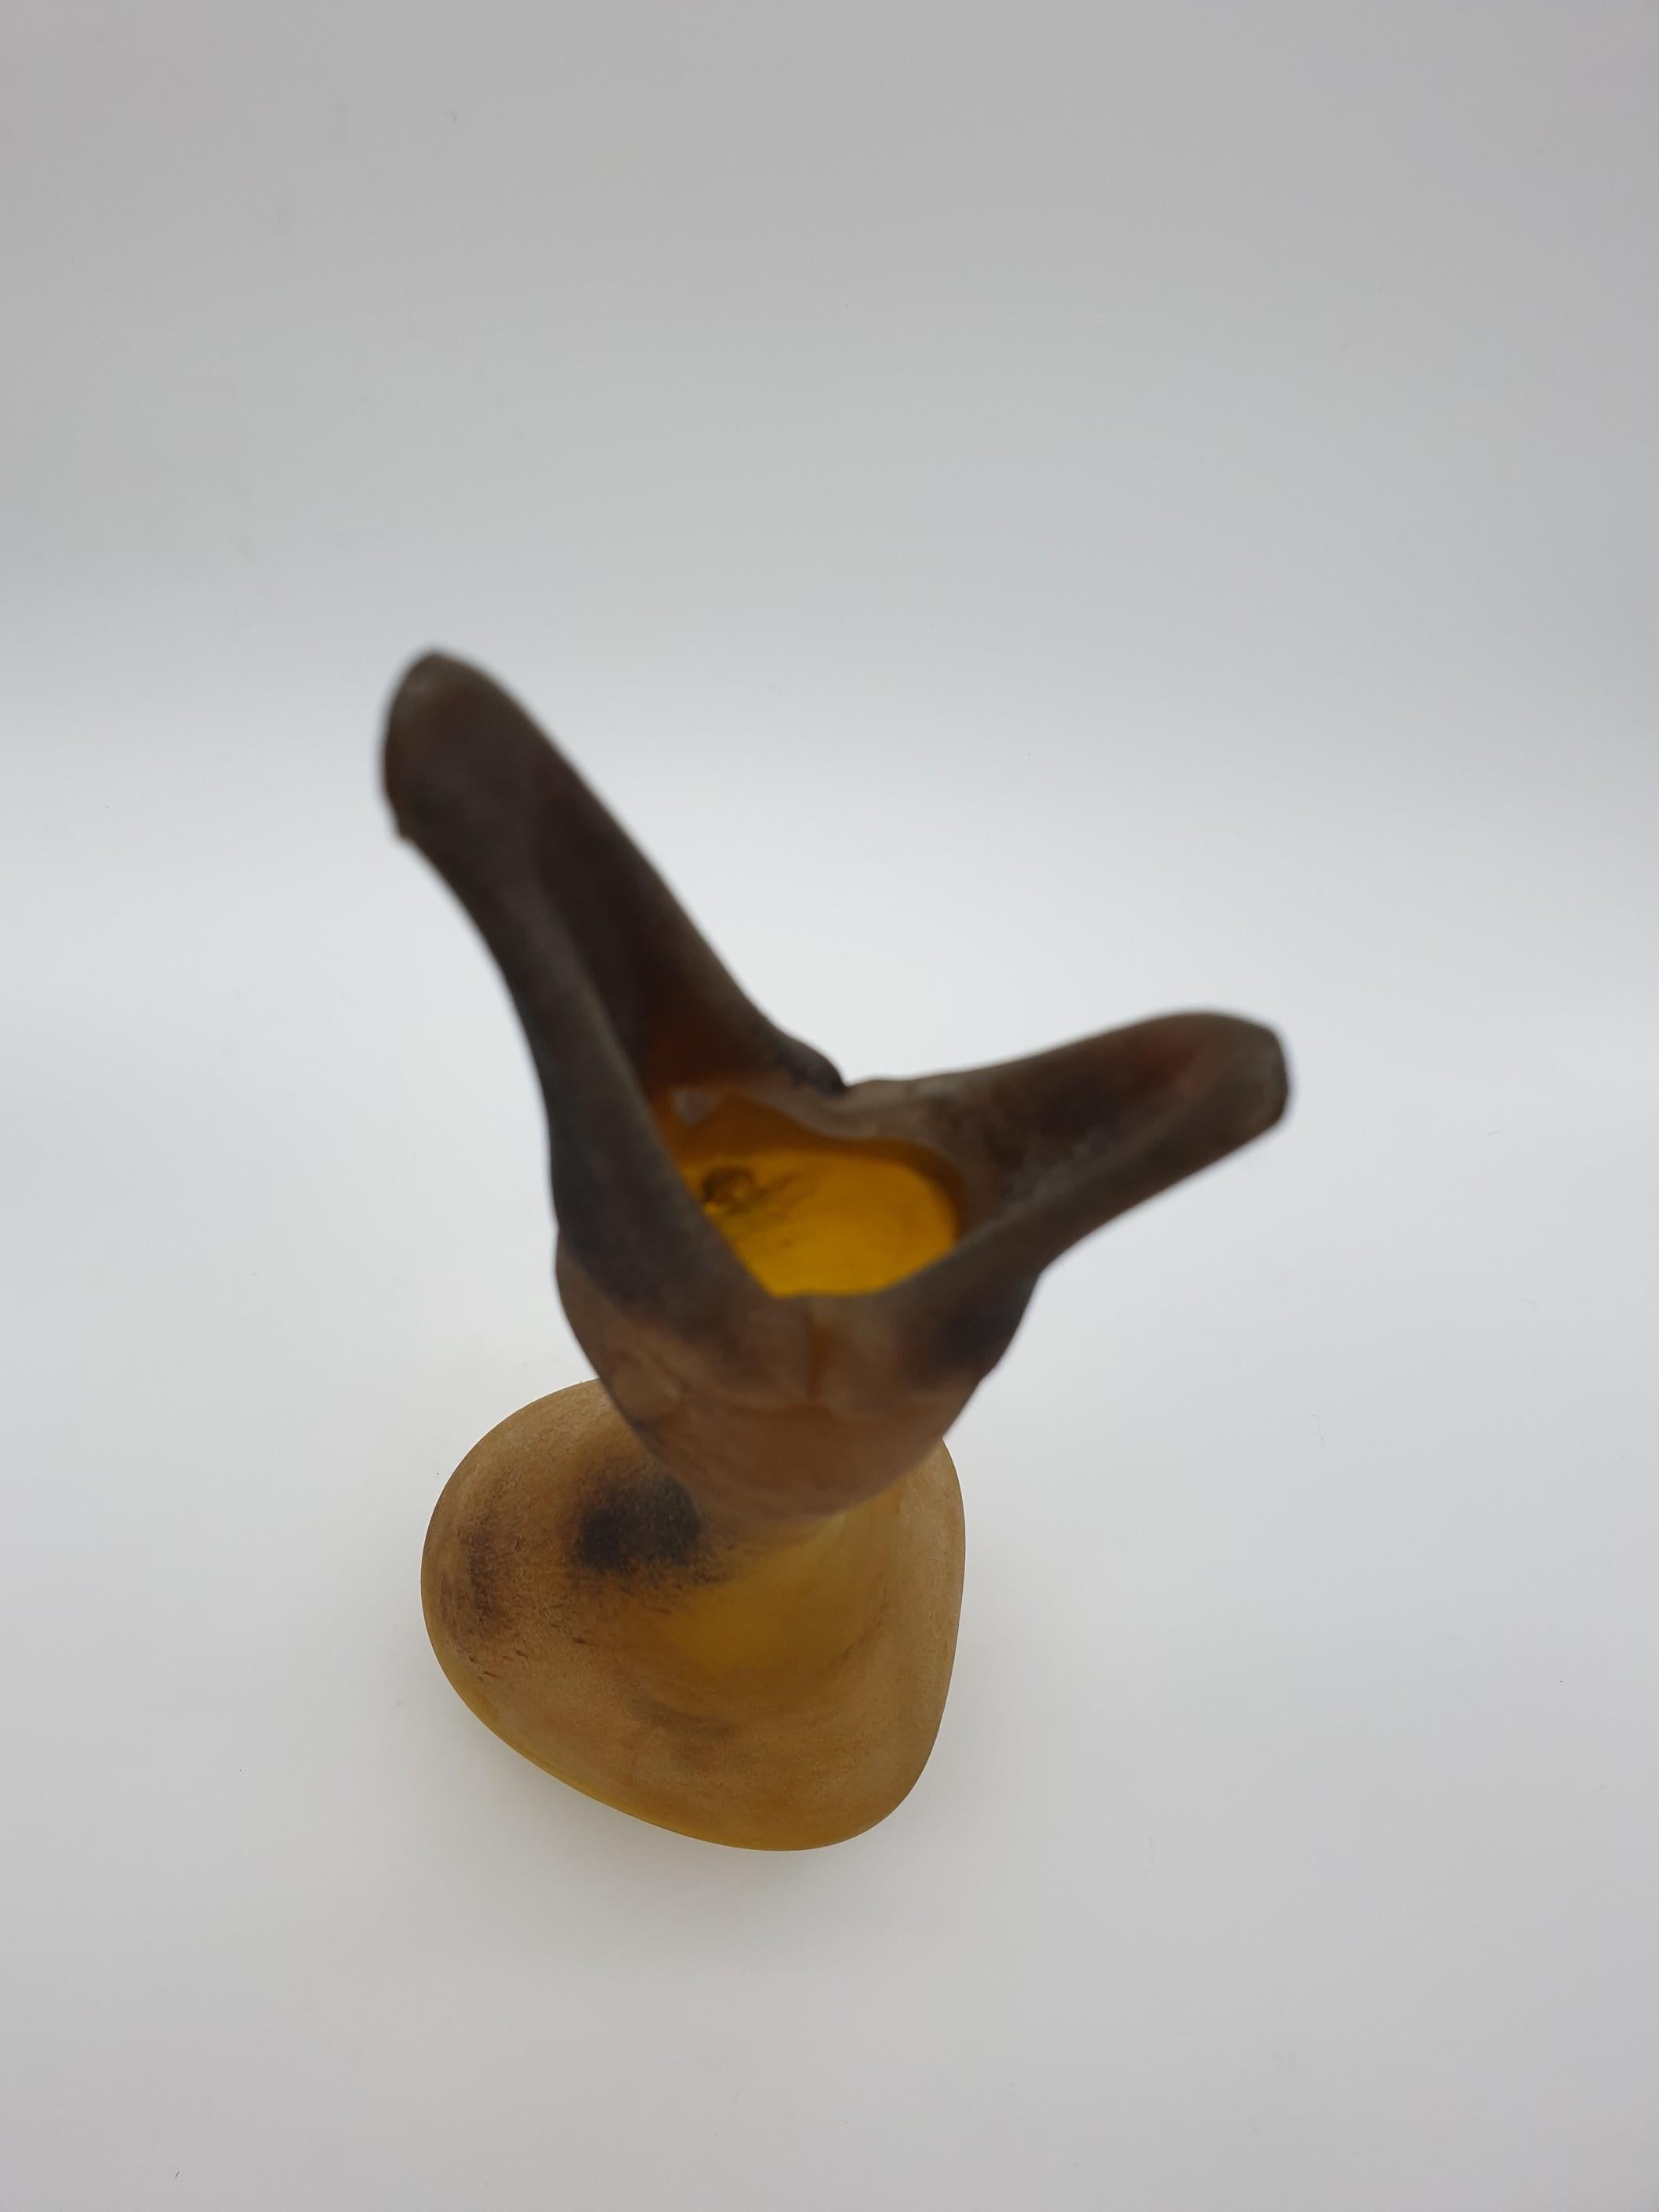 Modern Large Murano Glass Duck Vase by Antonio Da Ros at Gino Cenedese, 1960s For Sale 8